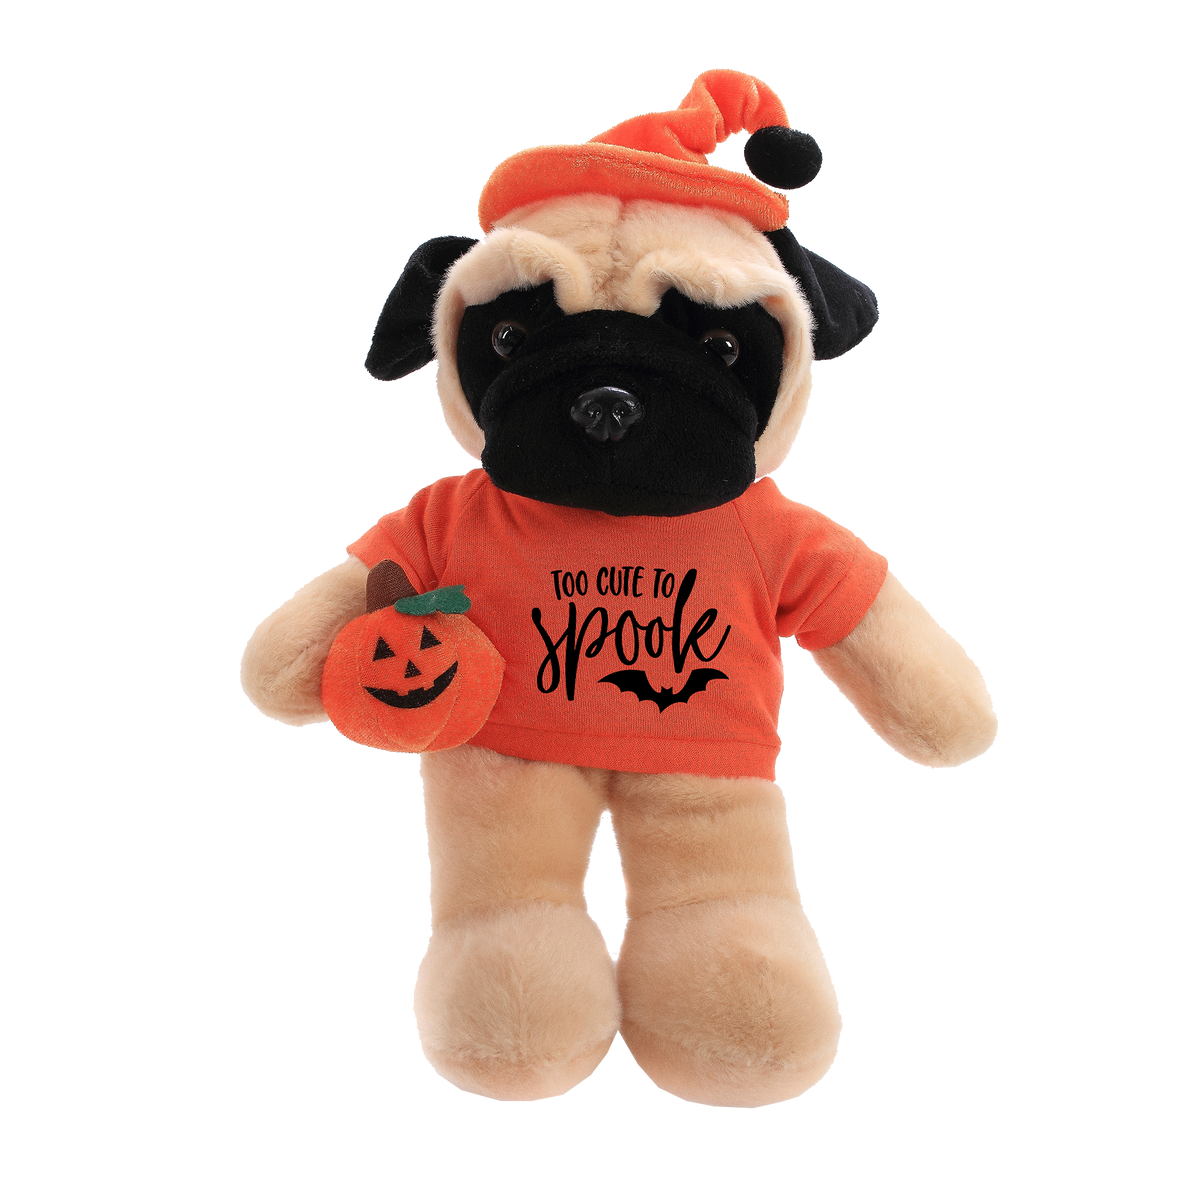 Details about   Halloween Floppy Pug 12" Too cute to Spook Plush Stuffed Animal 